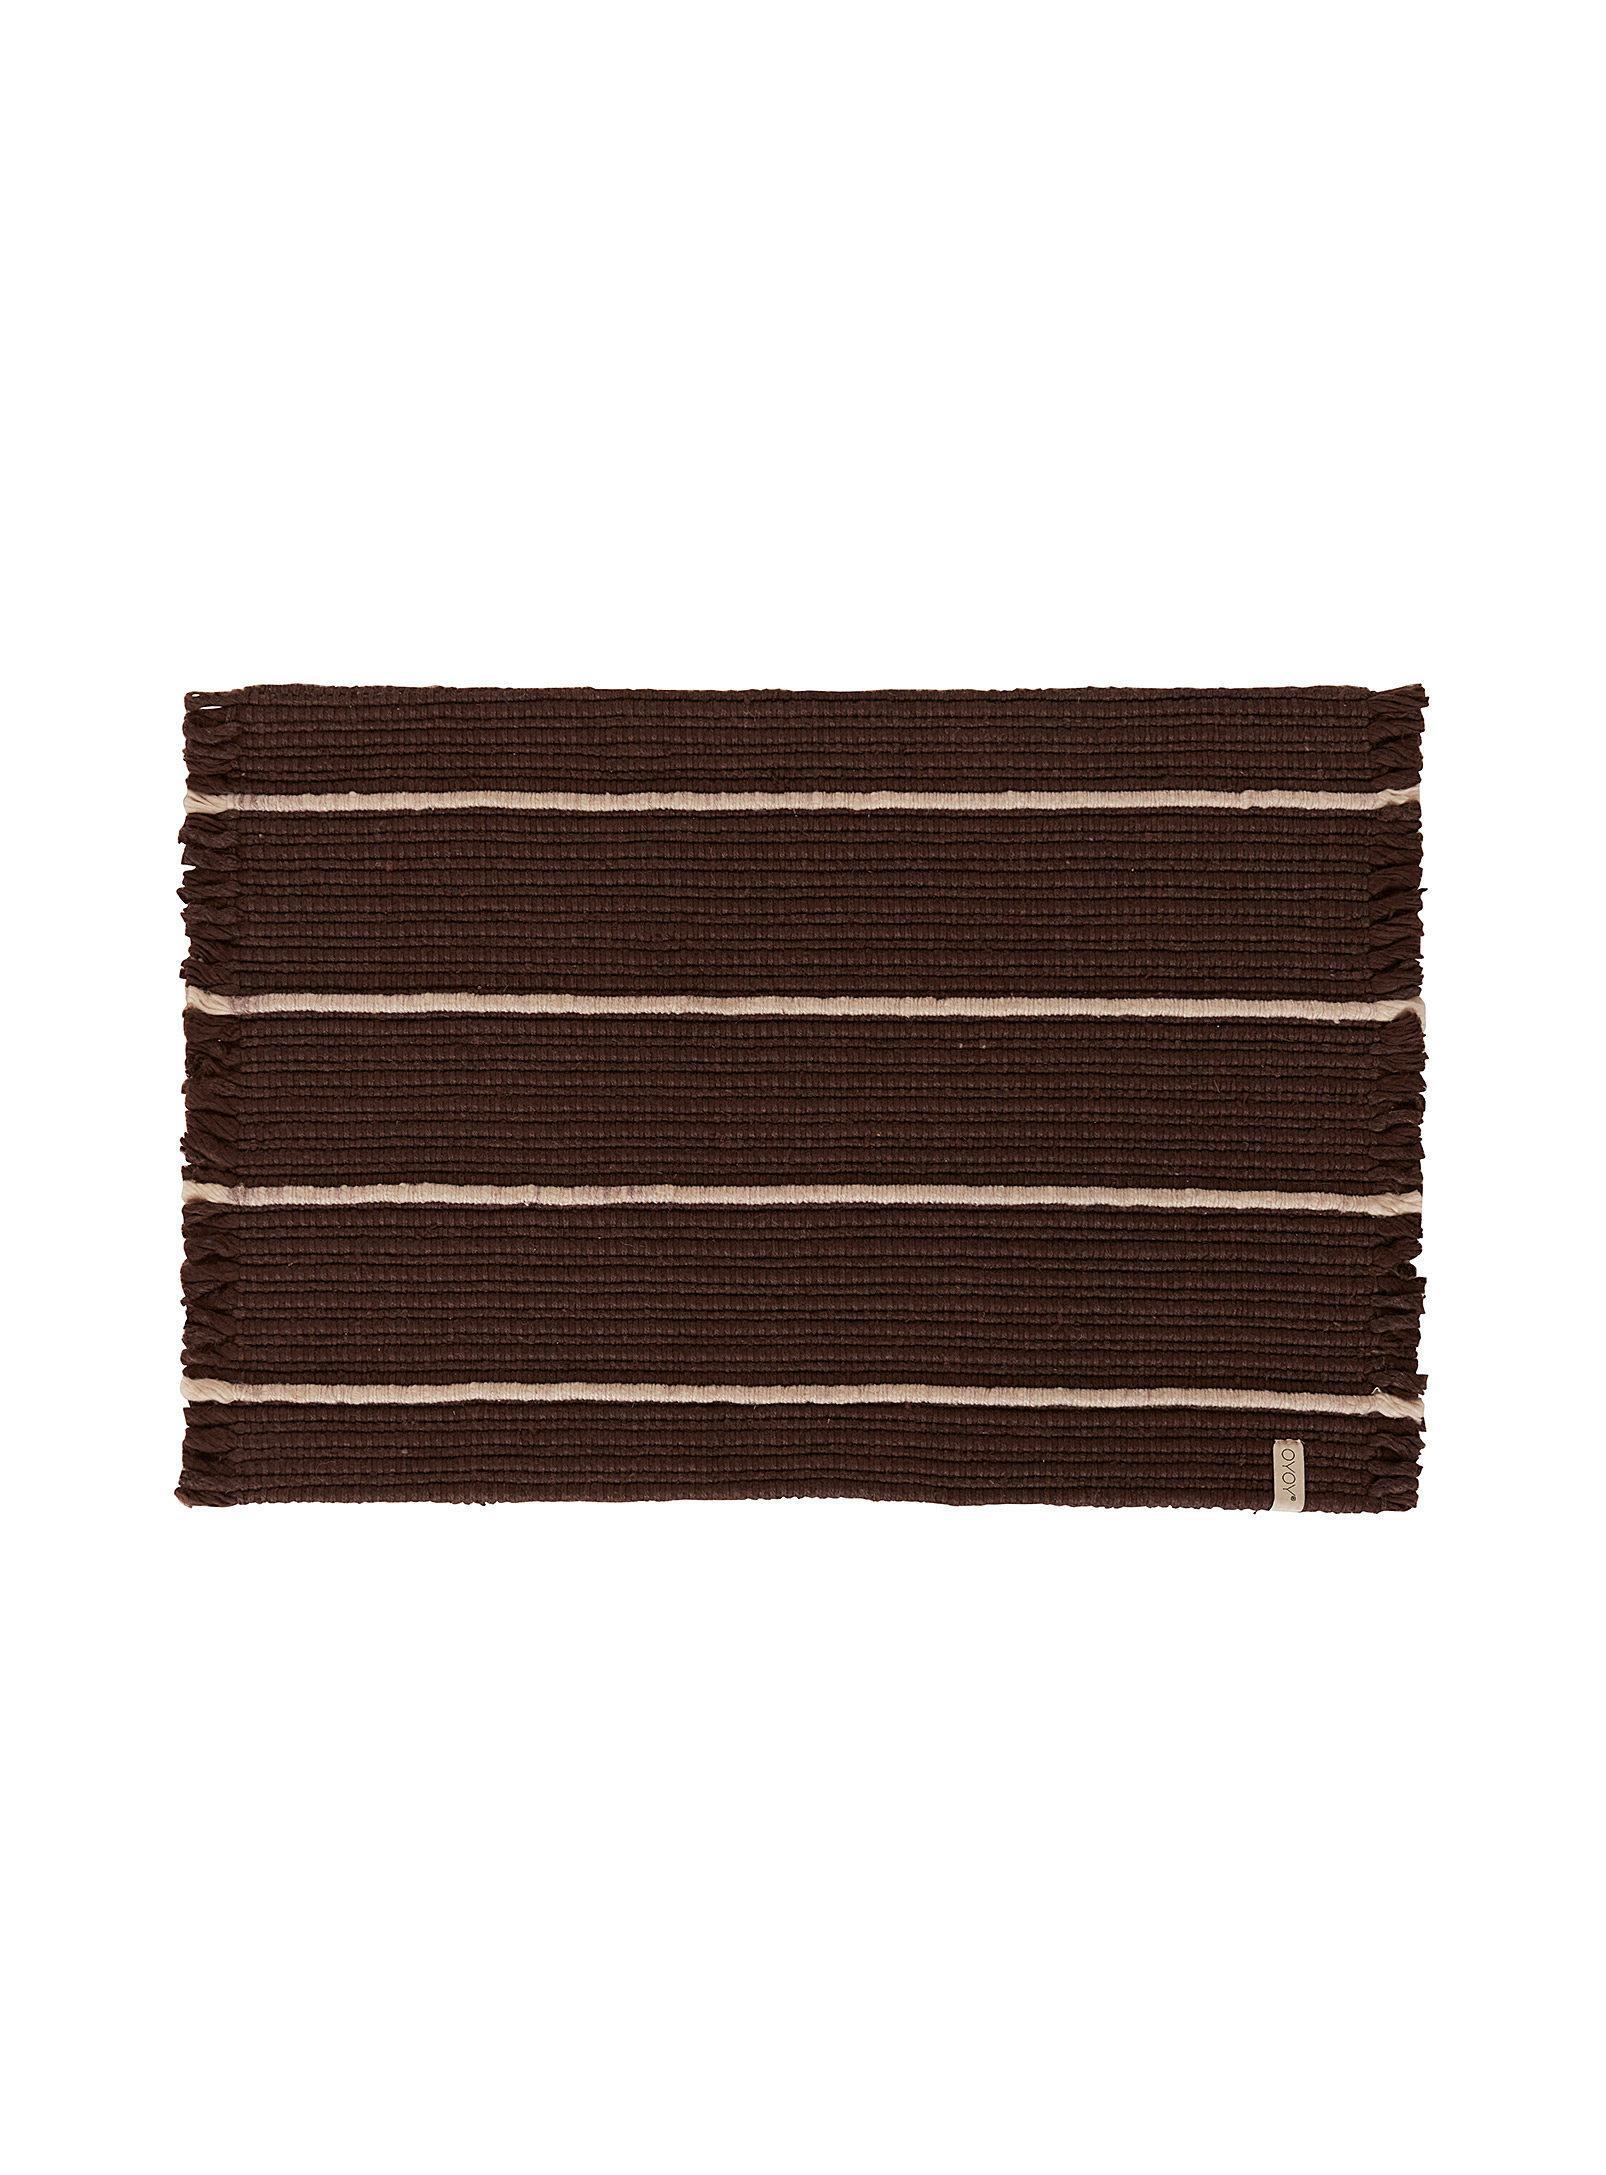 Oyoy Living Design Contrasting Stripes Textured Rug 52 X 76 Cm In Brown